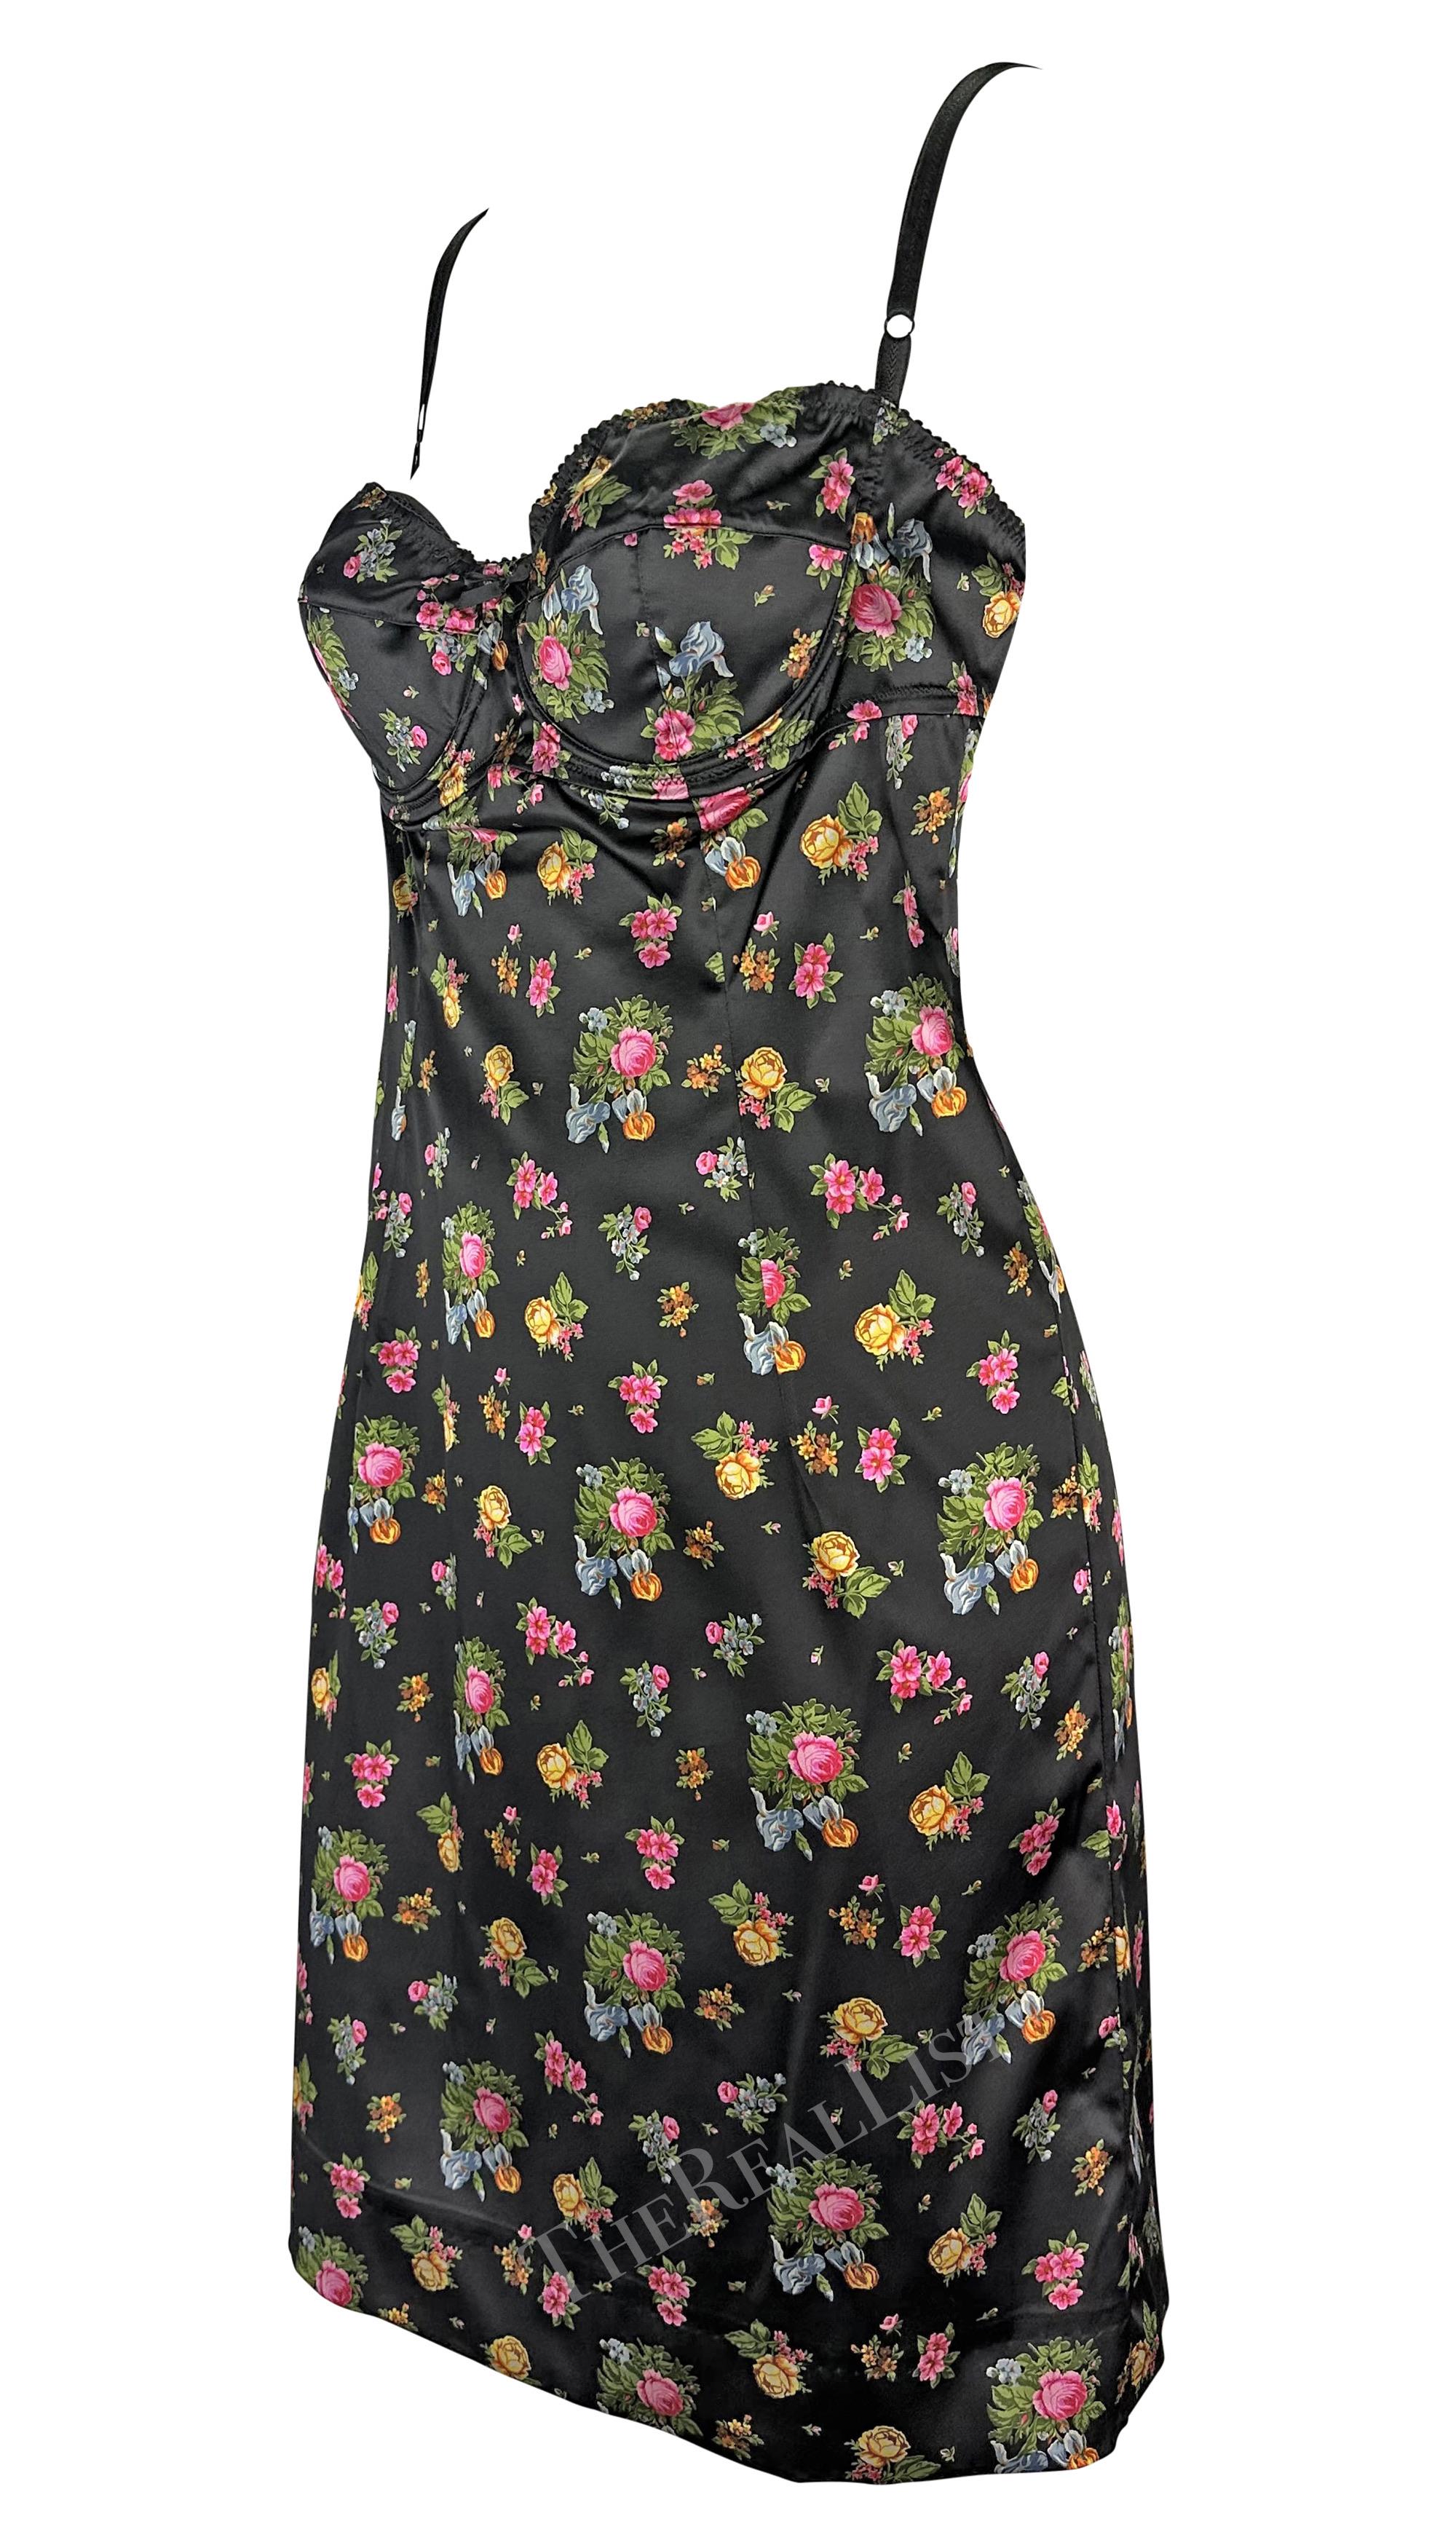 Presenting a fabulous black floral Dolce & Gabbana mini dress. From the early 2000s, this form-fitting black dress features a multicolor rose print. The dress is made complete with an outlined bust lending to a lingerie-effect and thin strap. Fall